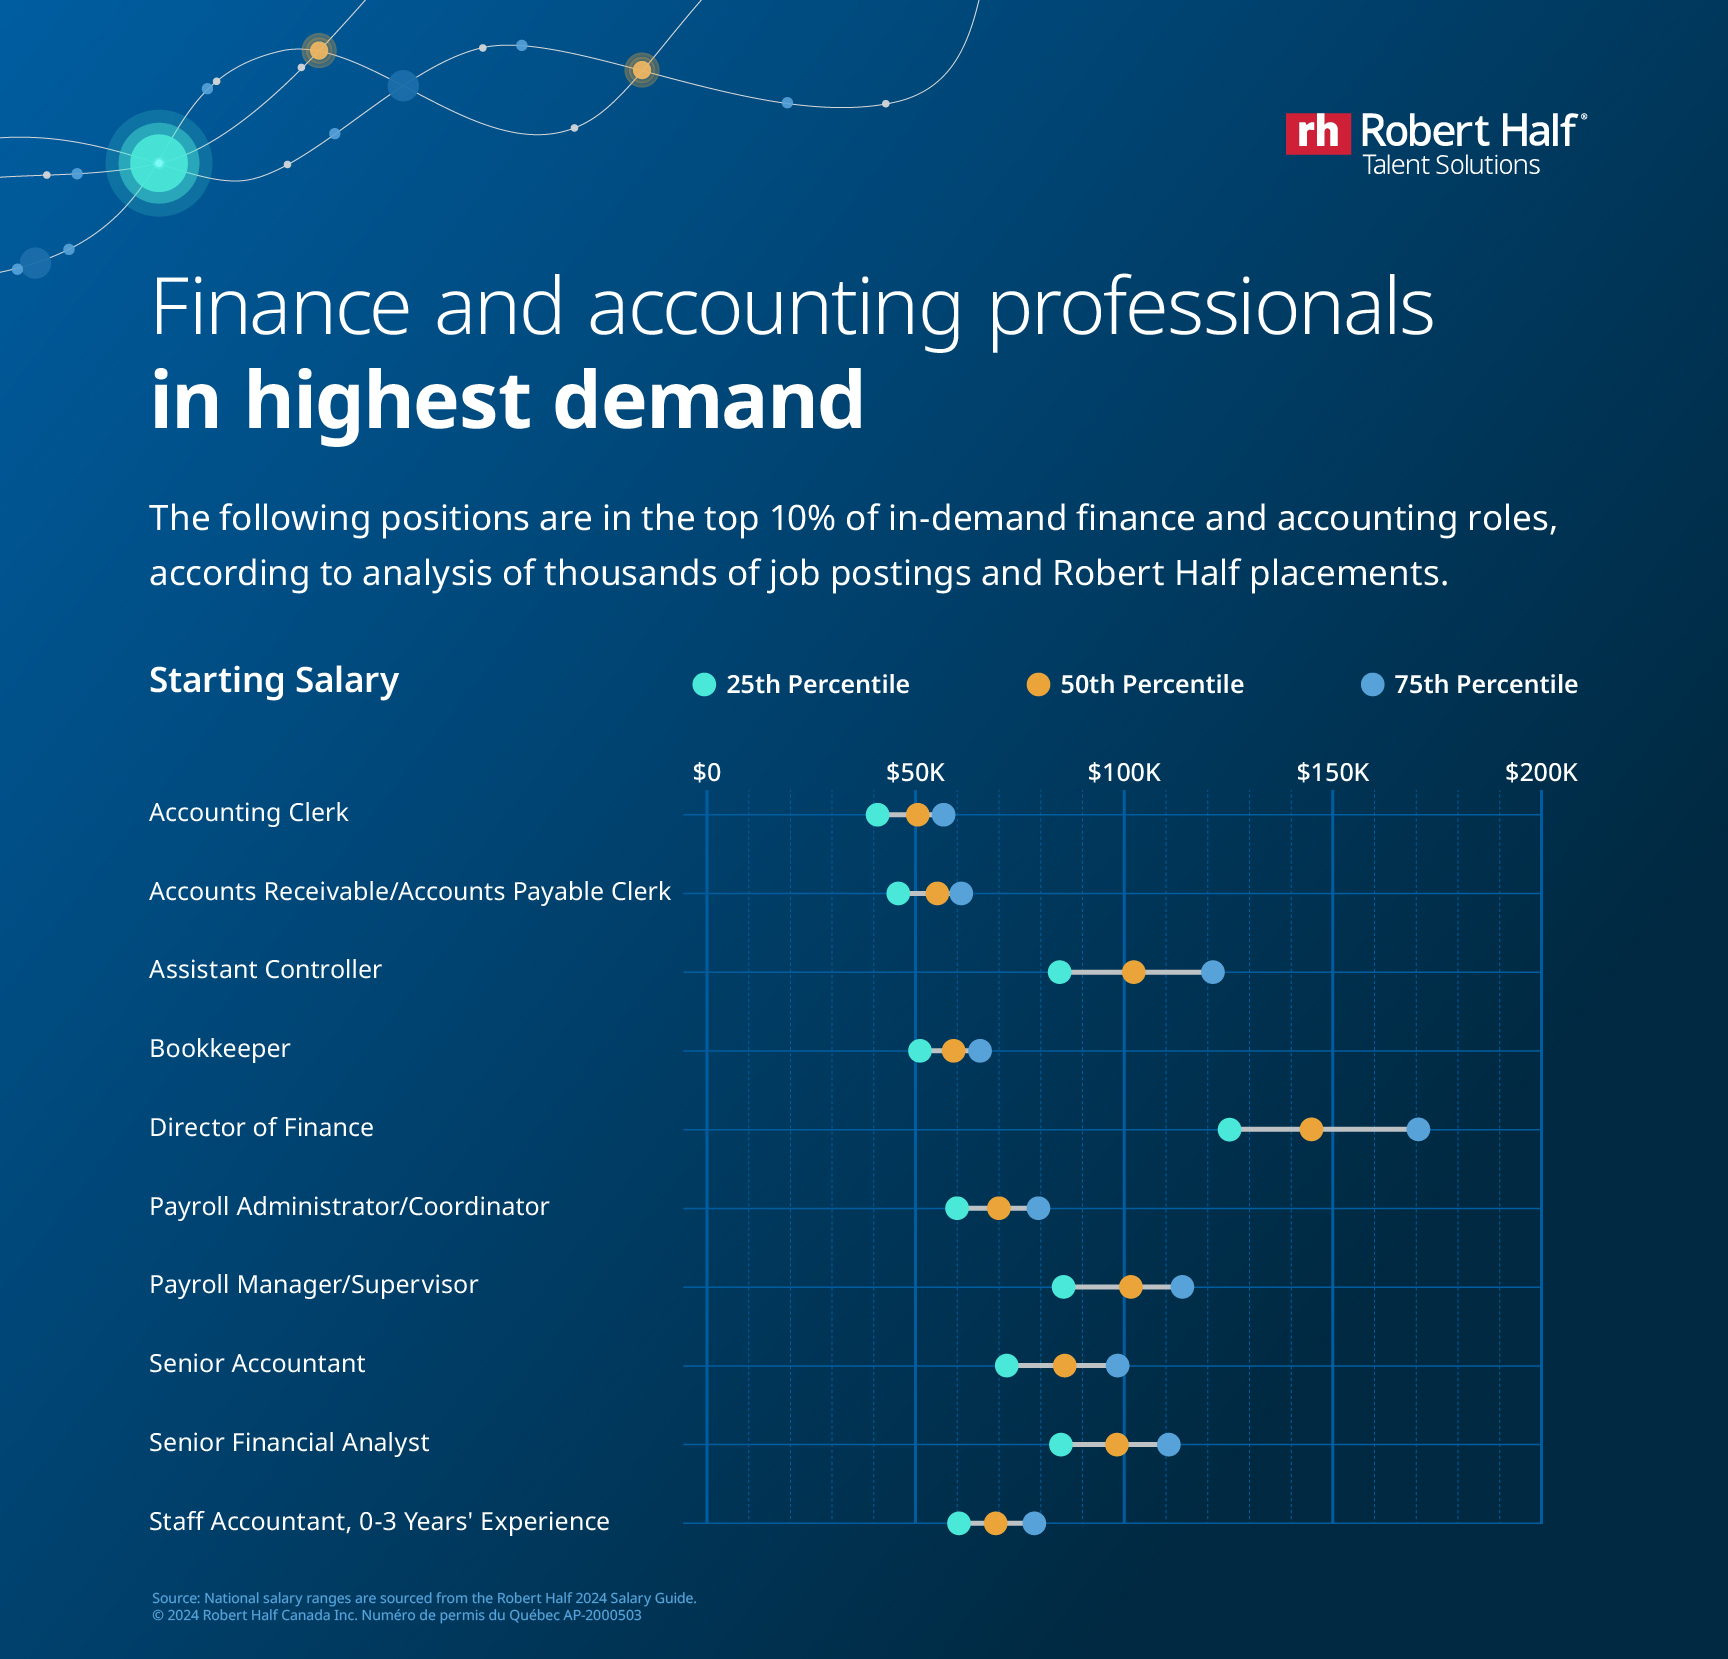 Infographic of finance and accounting roles in highest demand, with starting salary ranges.